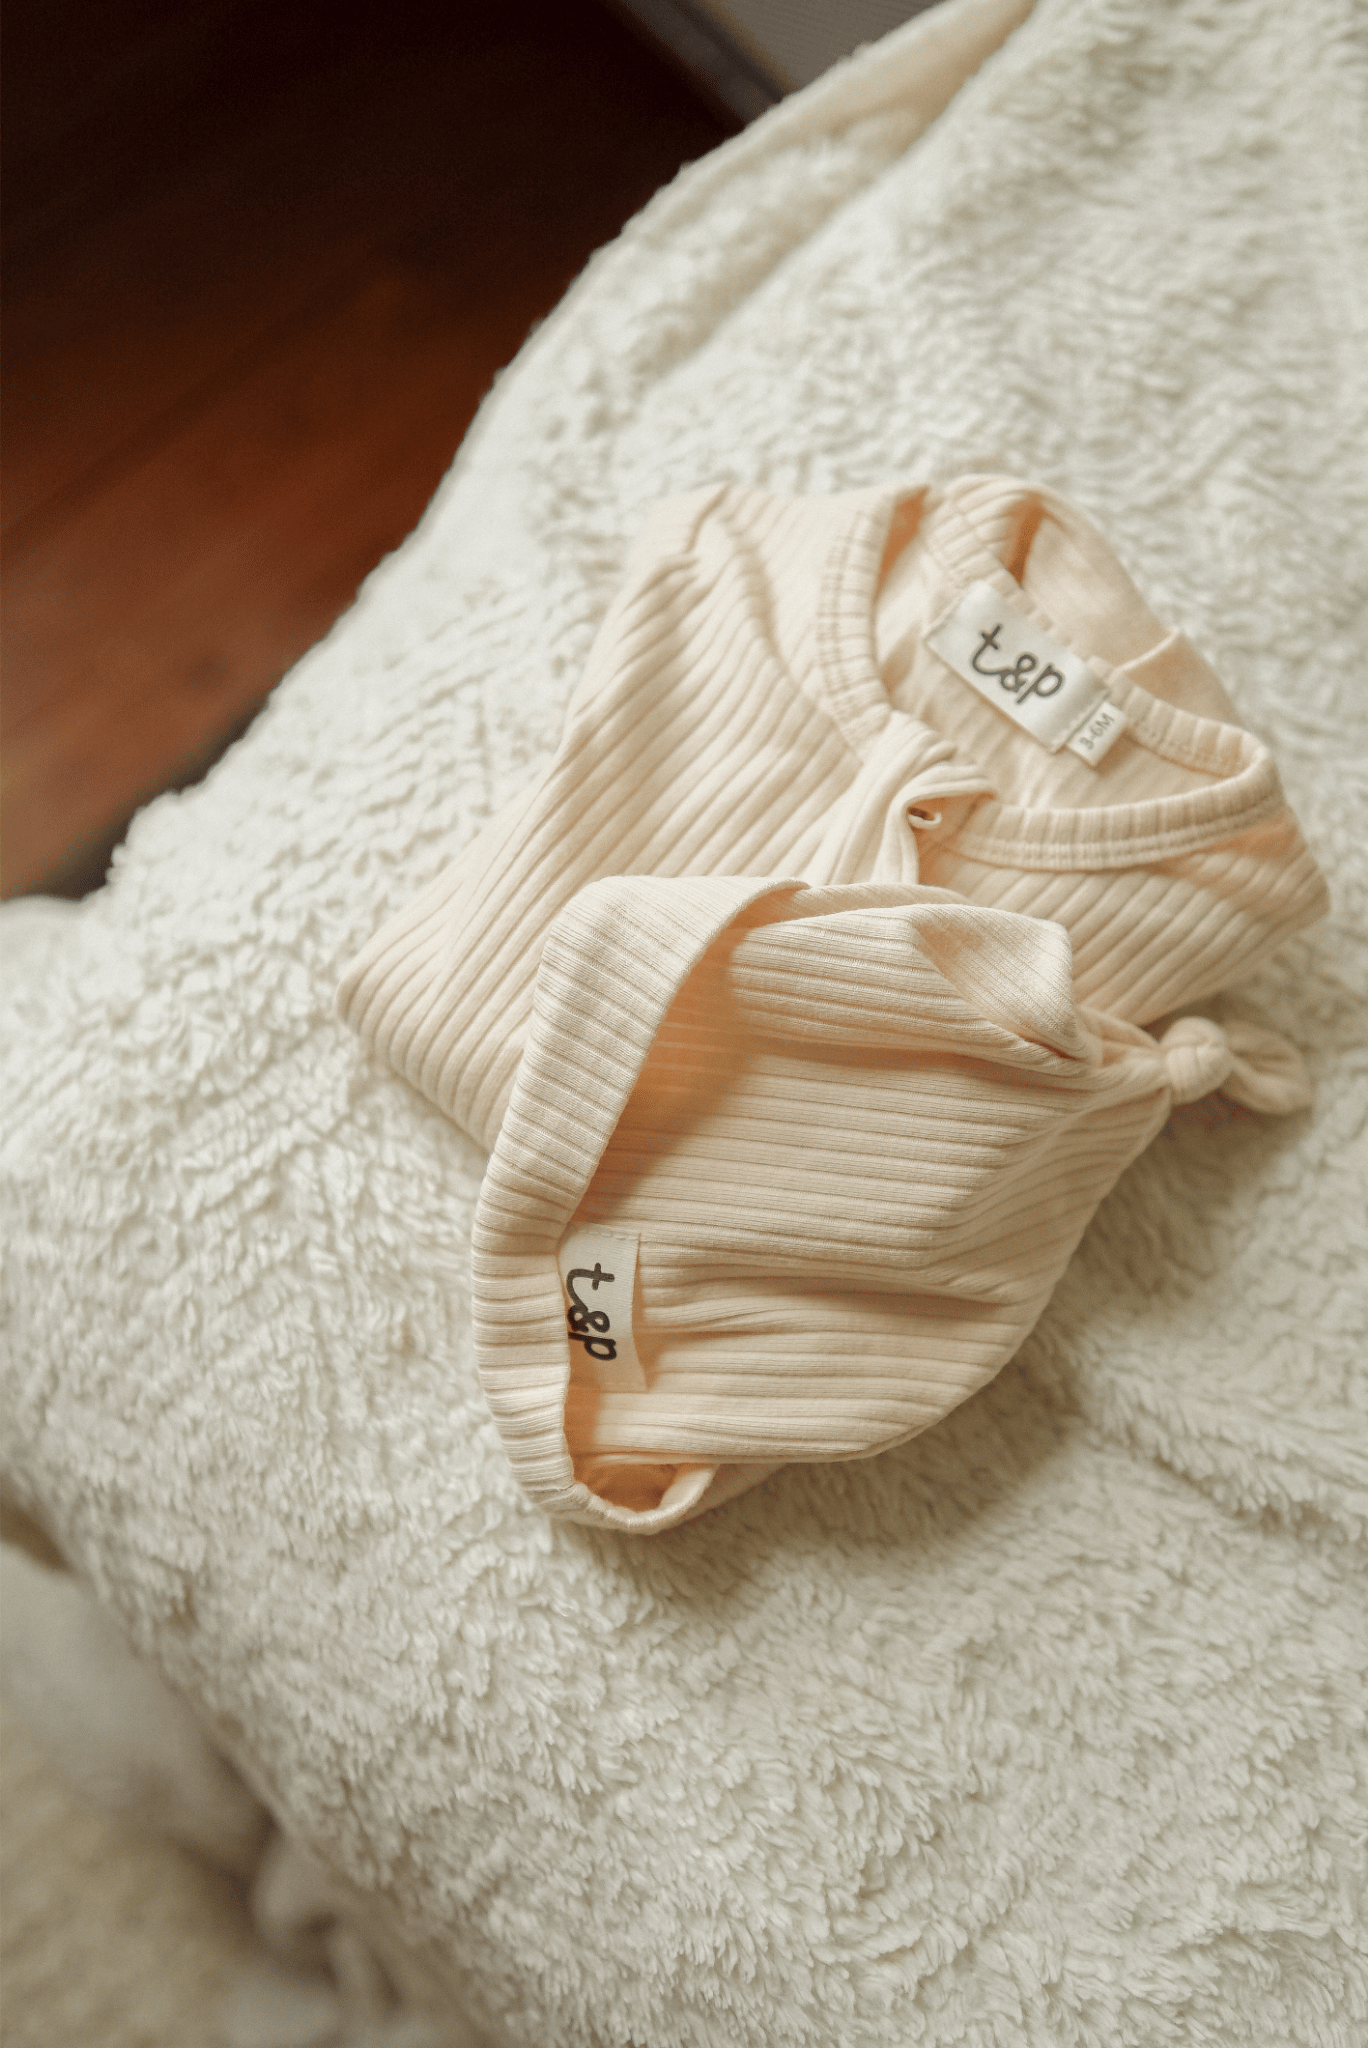 Organic Cotton Long Sleeved Footie Bodysuit with Beanie